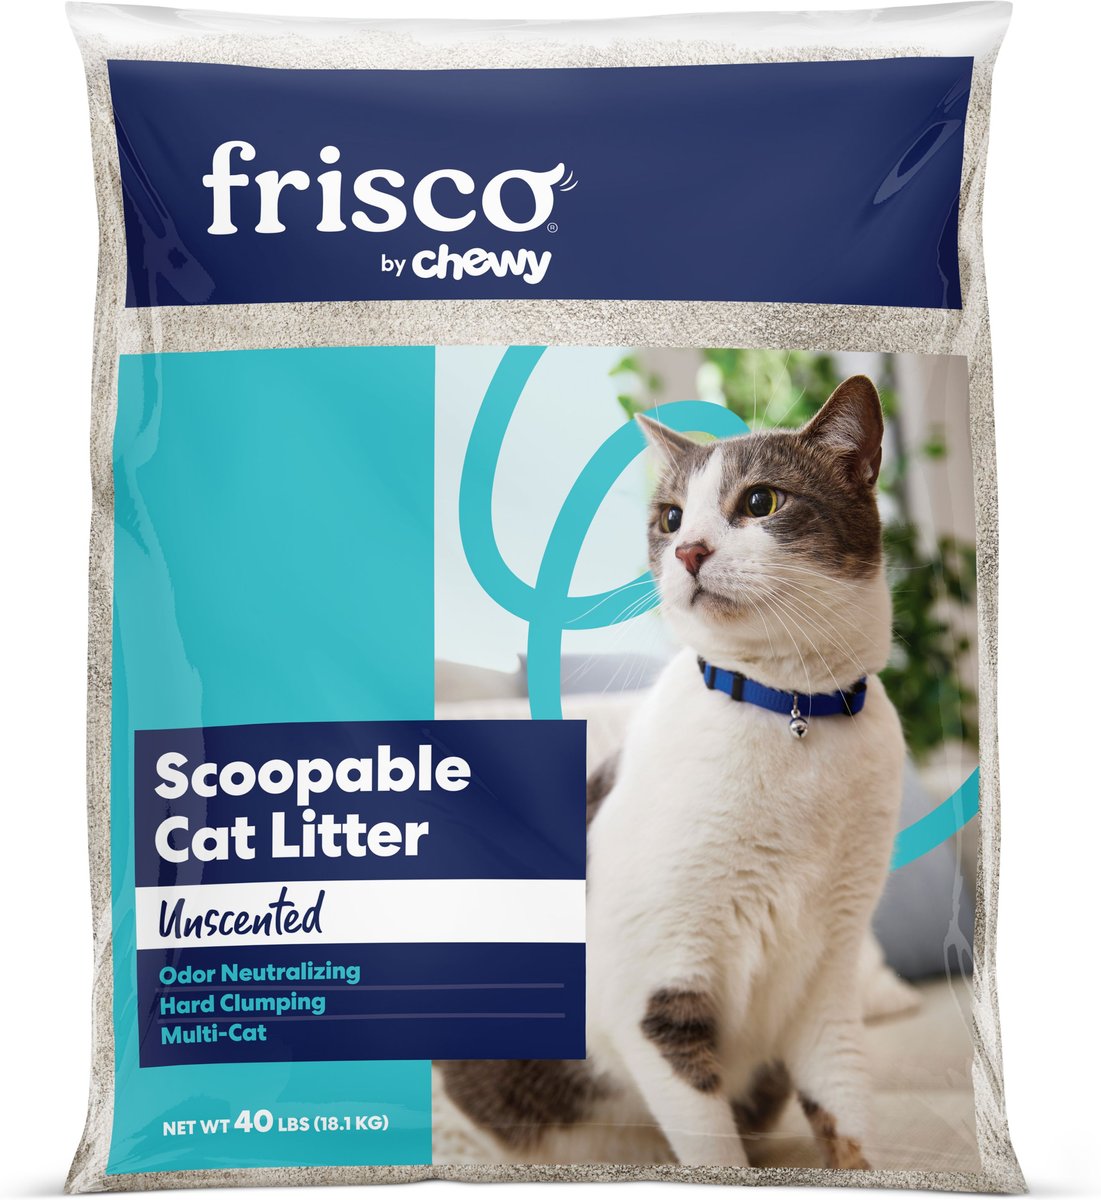 frisco-scoopable-cat-litter